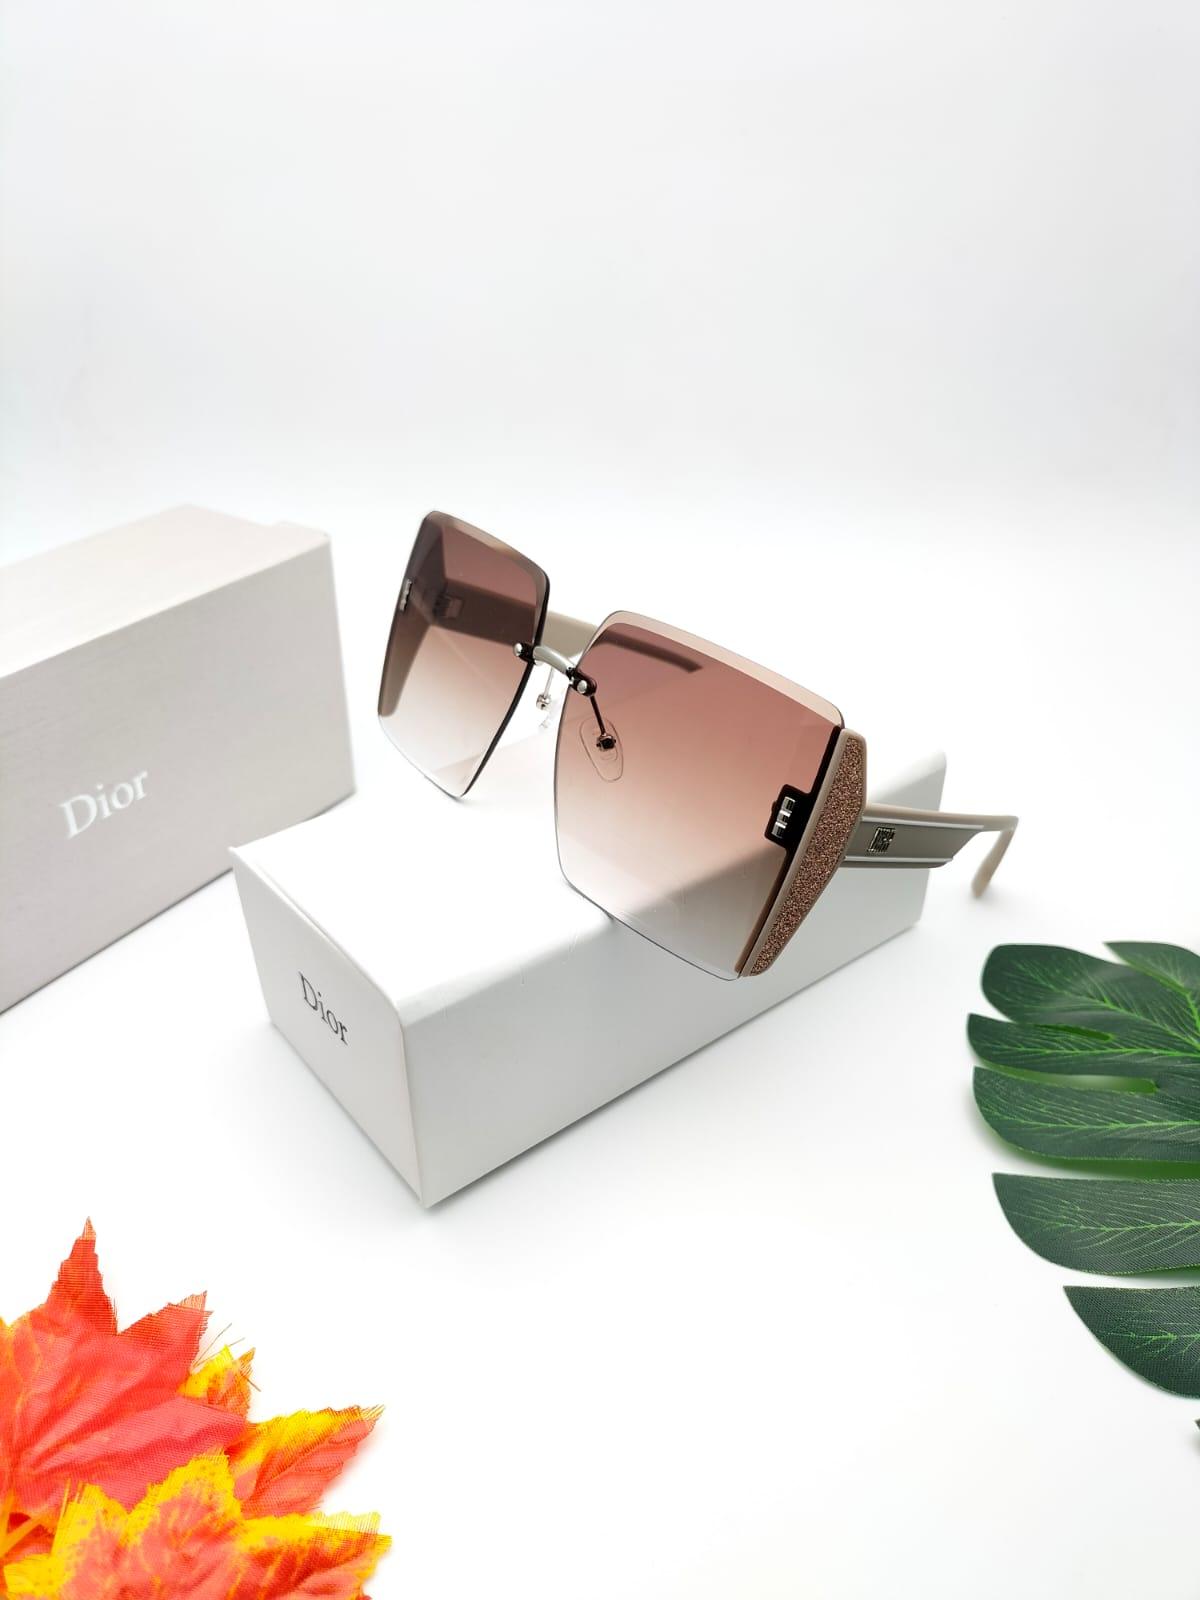 Dior spectacles A7002 - Customized Prescription Sunglasses and Spectacles